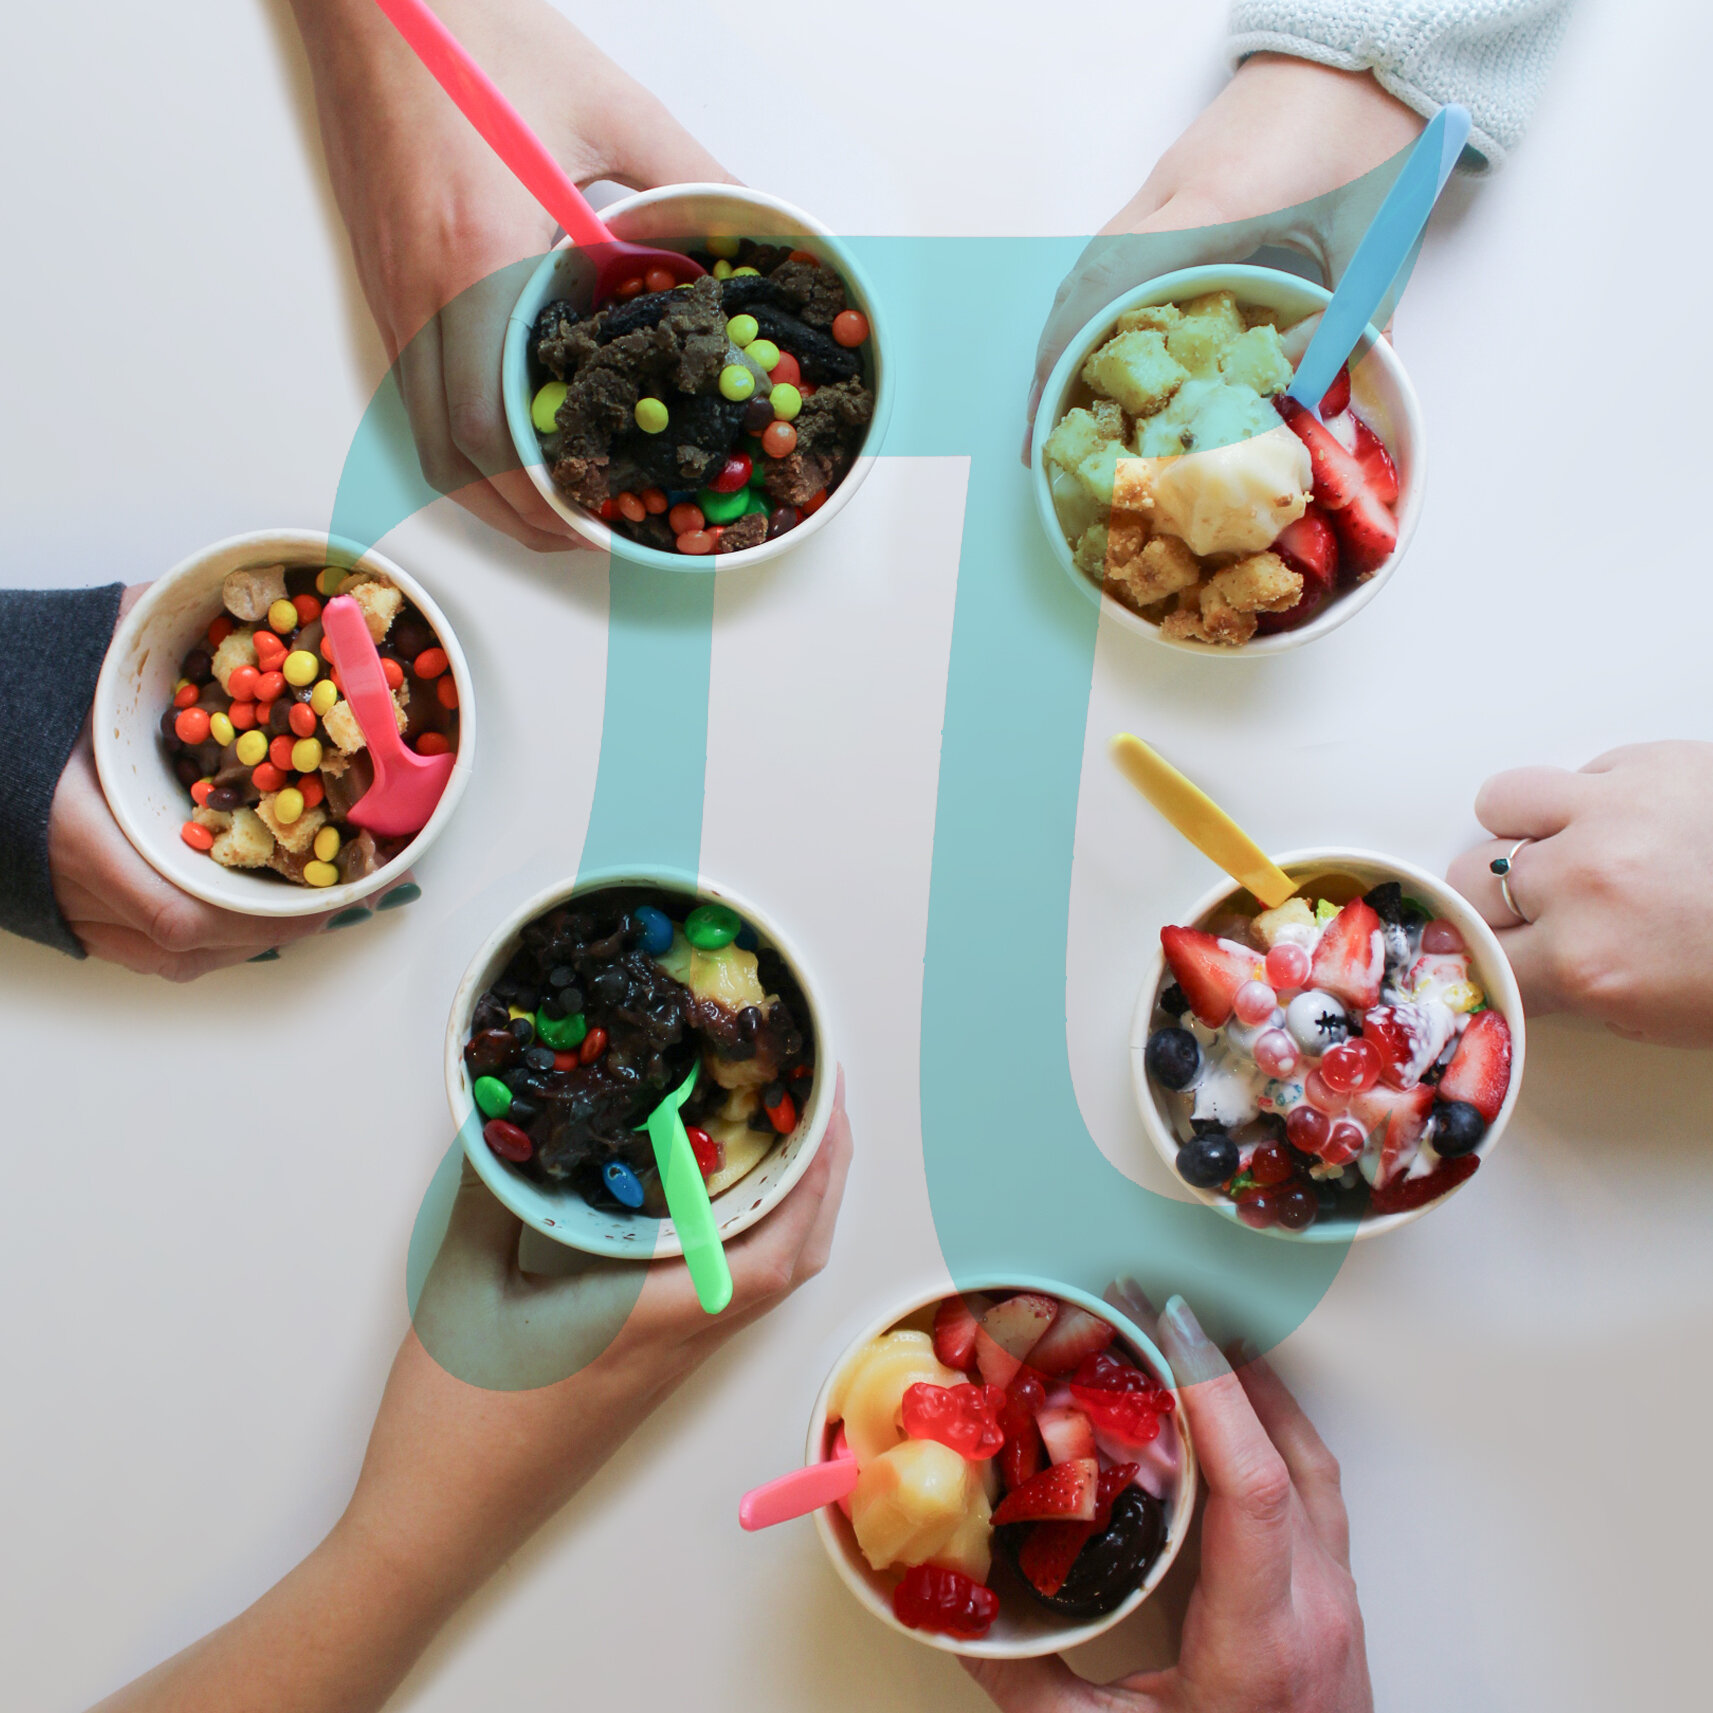 HAPPY PI DAY, KC! Celebrate the day with BOGO $3.14 FroYo. 🍦🙌🍦

This sweet deal will be available all day long at all Yogurtini KC locations. Grab your friends and family and join us at the Plaza, Shoal Creek, or Overland Park. Buy one cup of FroY